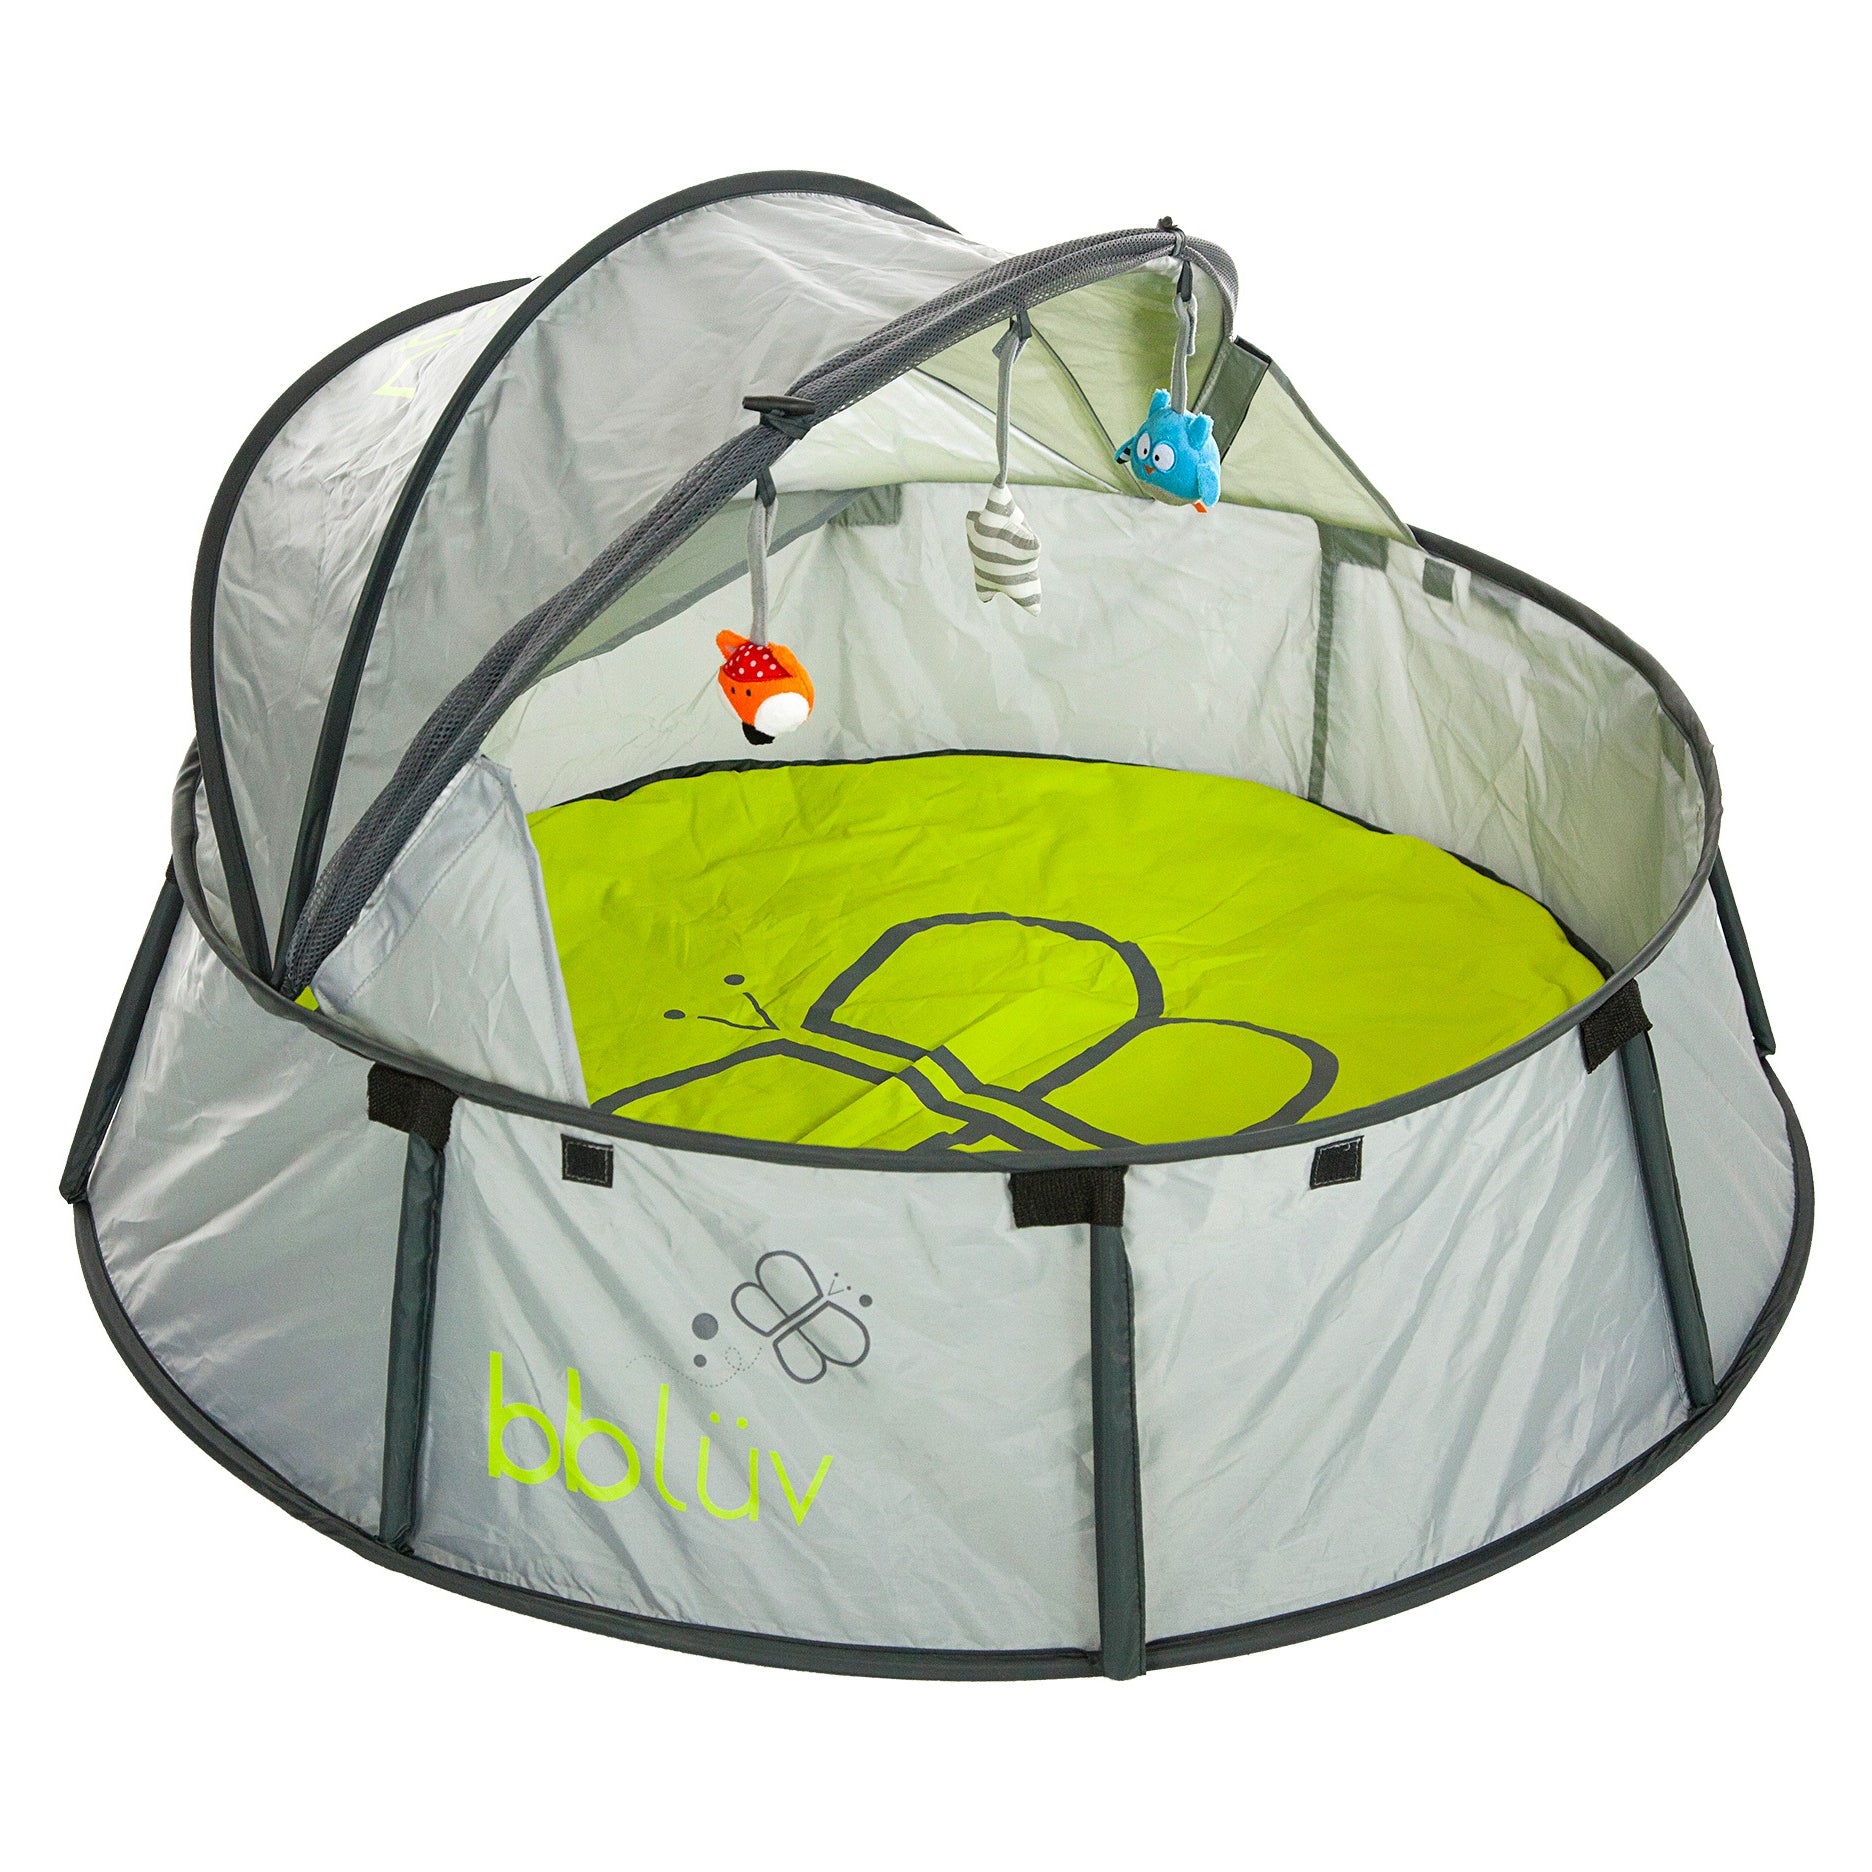 Nido 2-in-1 Travel Bed & Play Tent uniq